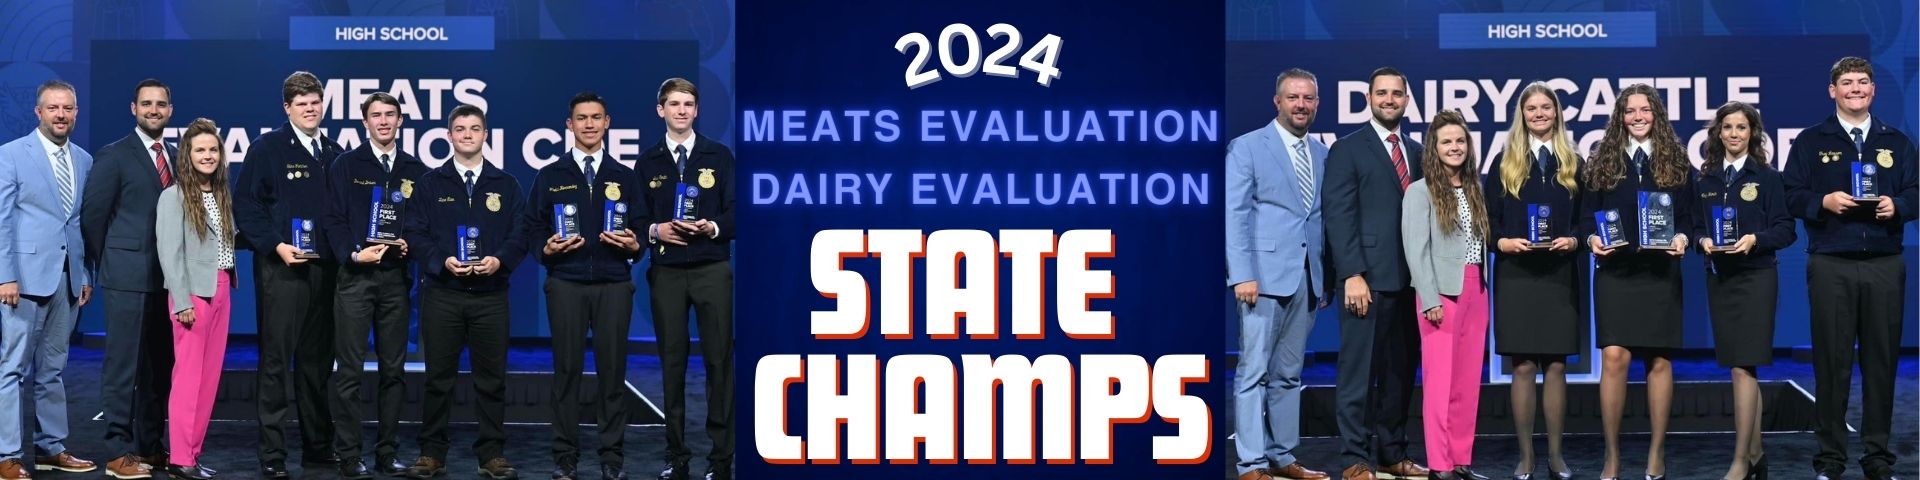 Dairy & Meat Evaluation Teams 2024 State Champs